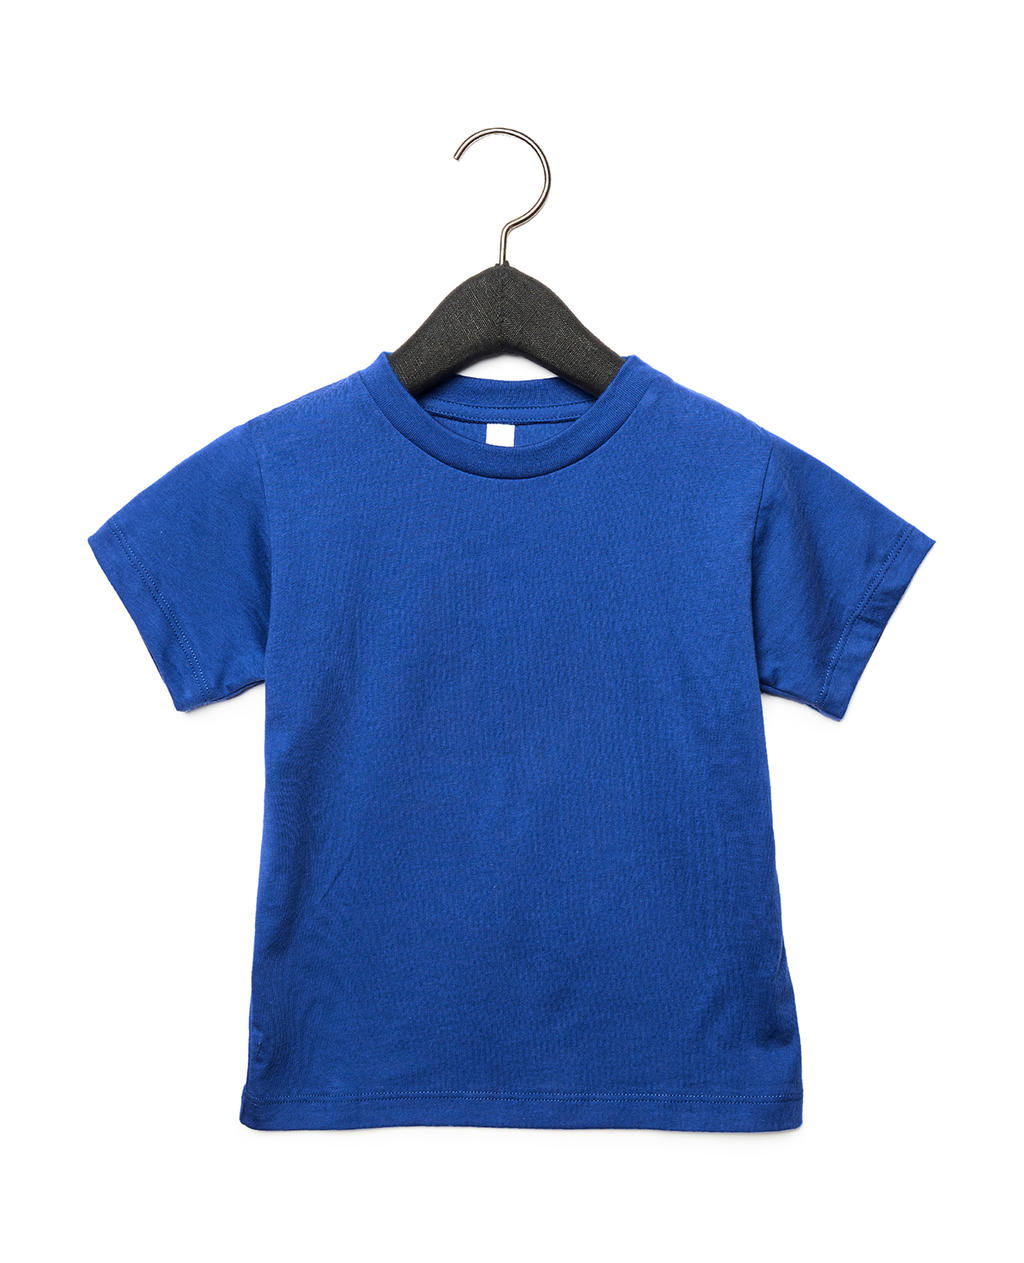  Toddler Jersey Short Sleeve Tee in Farbe True Royal